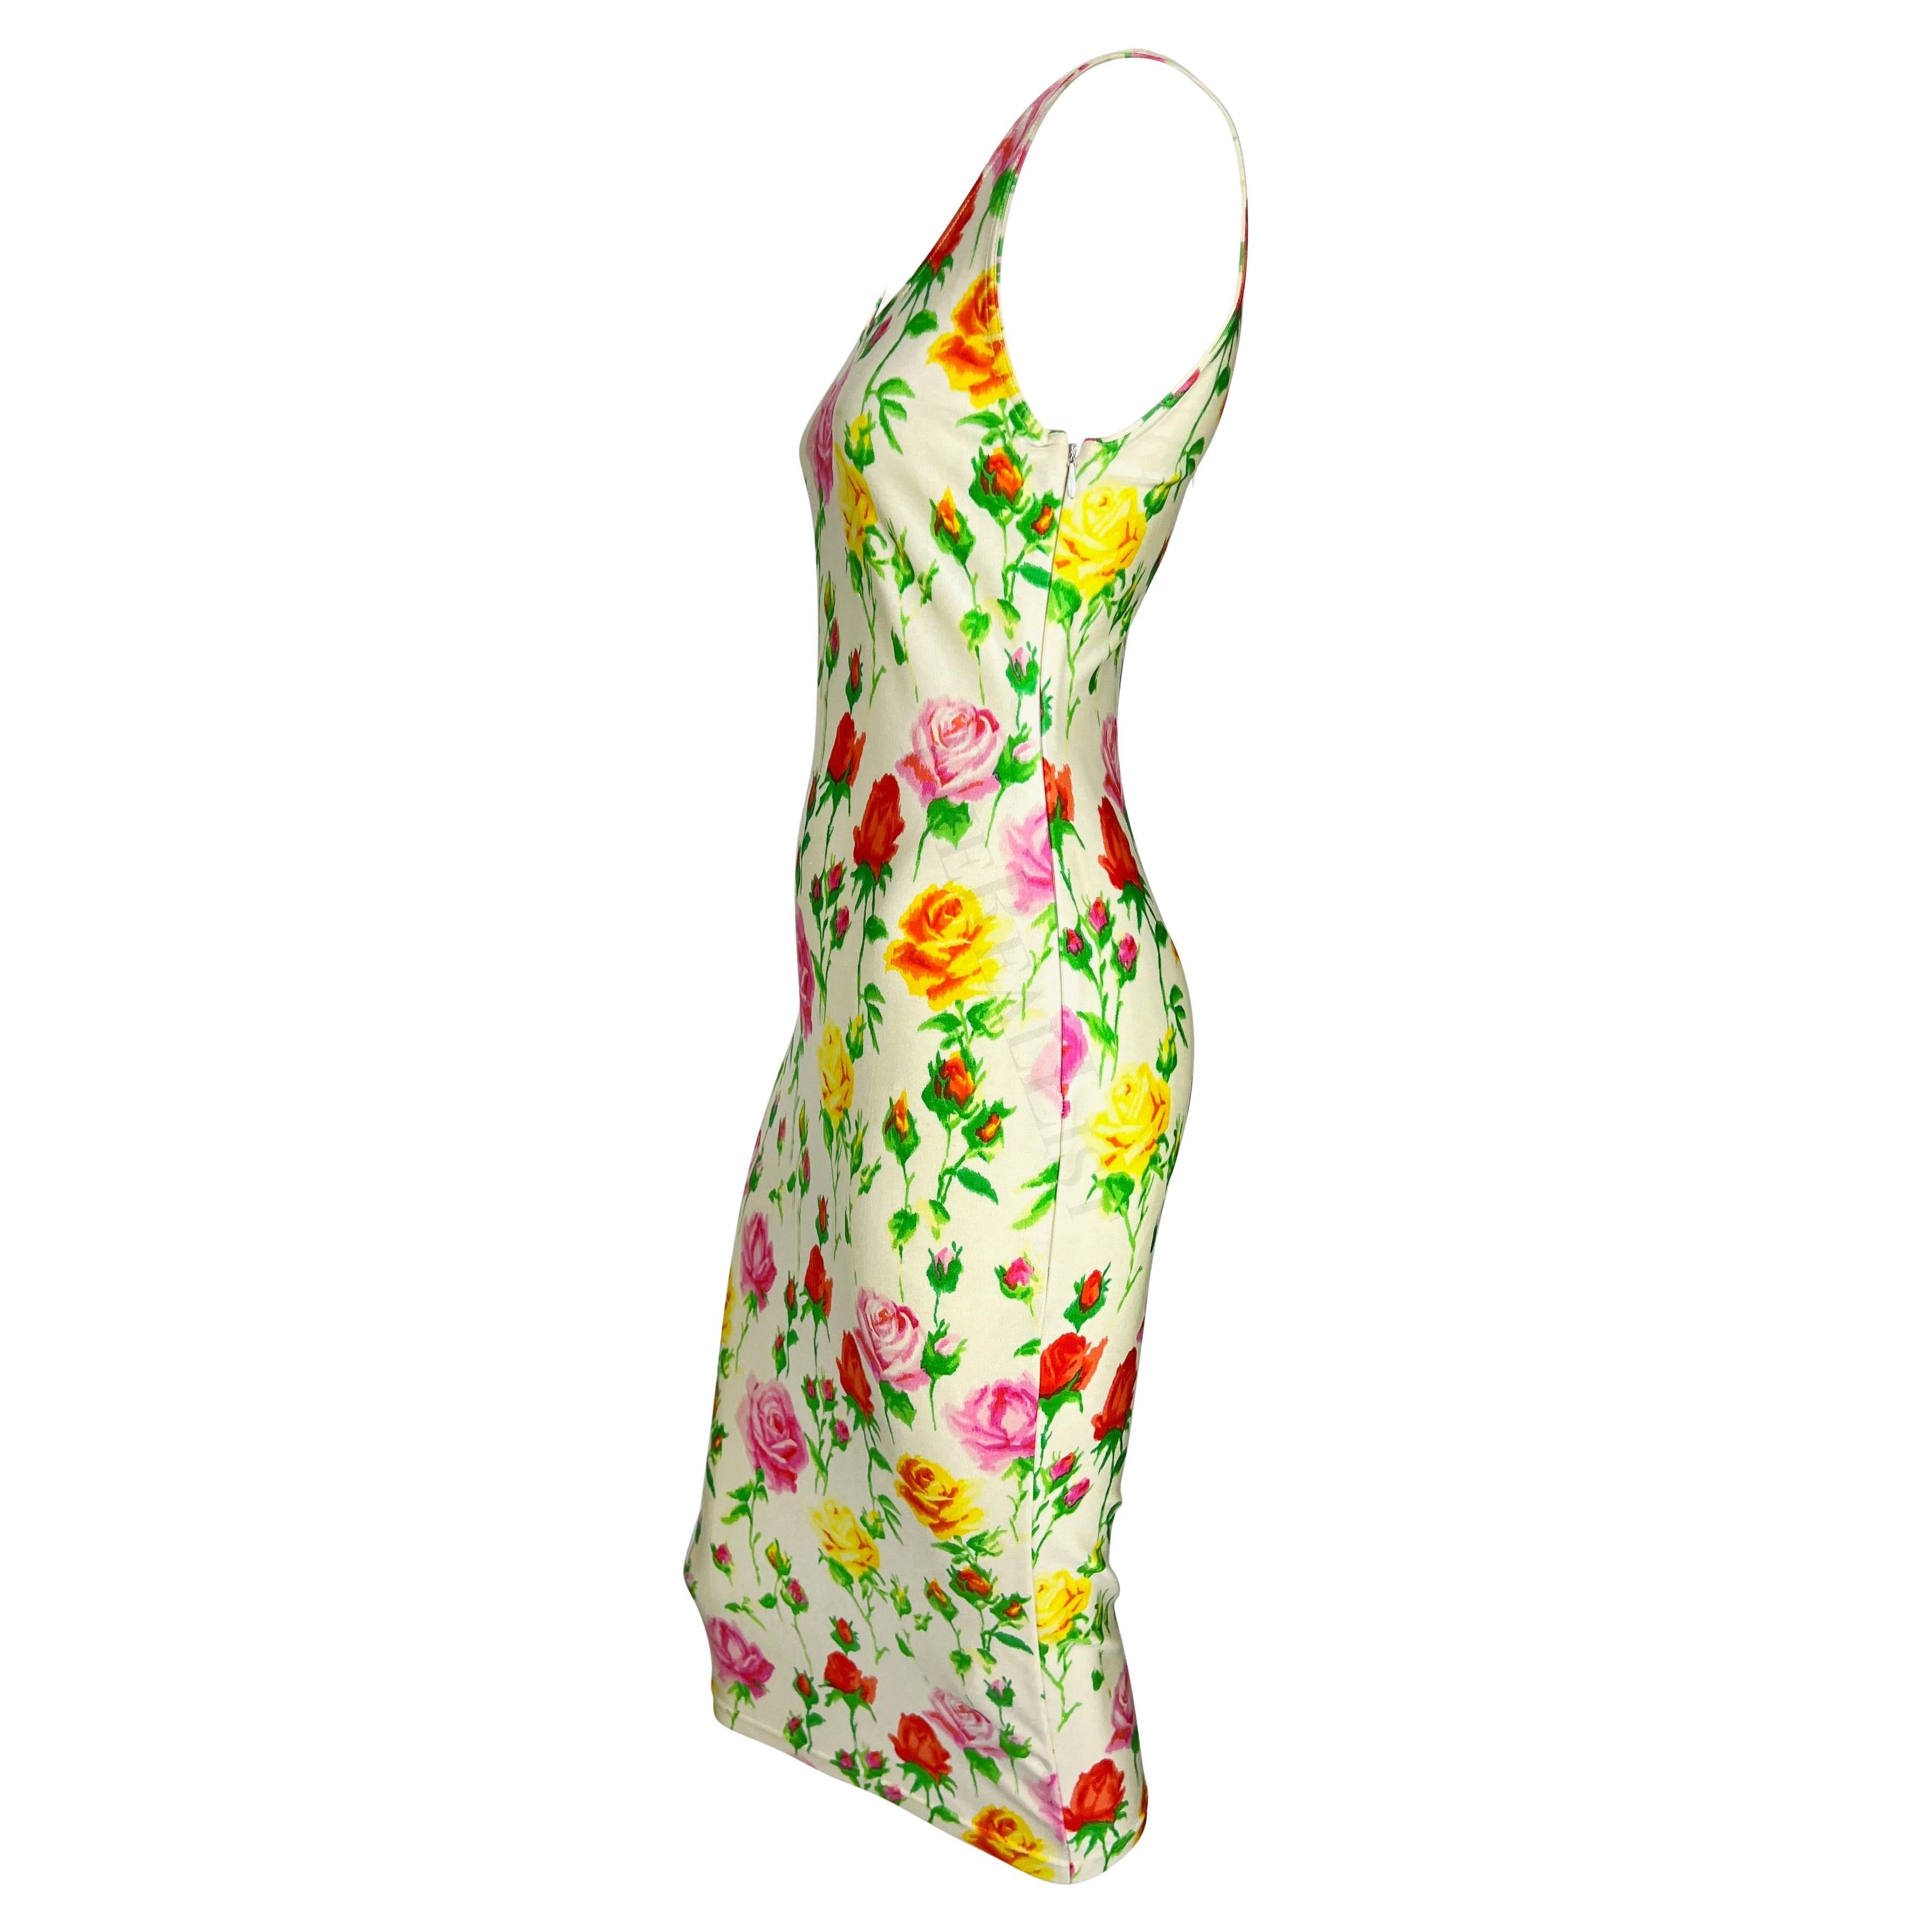 S/S 1995 Gianni Versace Runway White Floral Rose Bodycon Dress For Sale 2